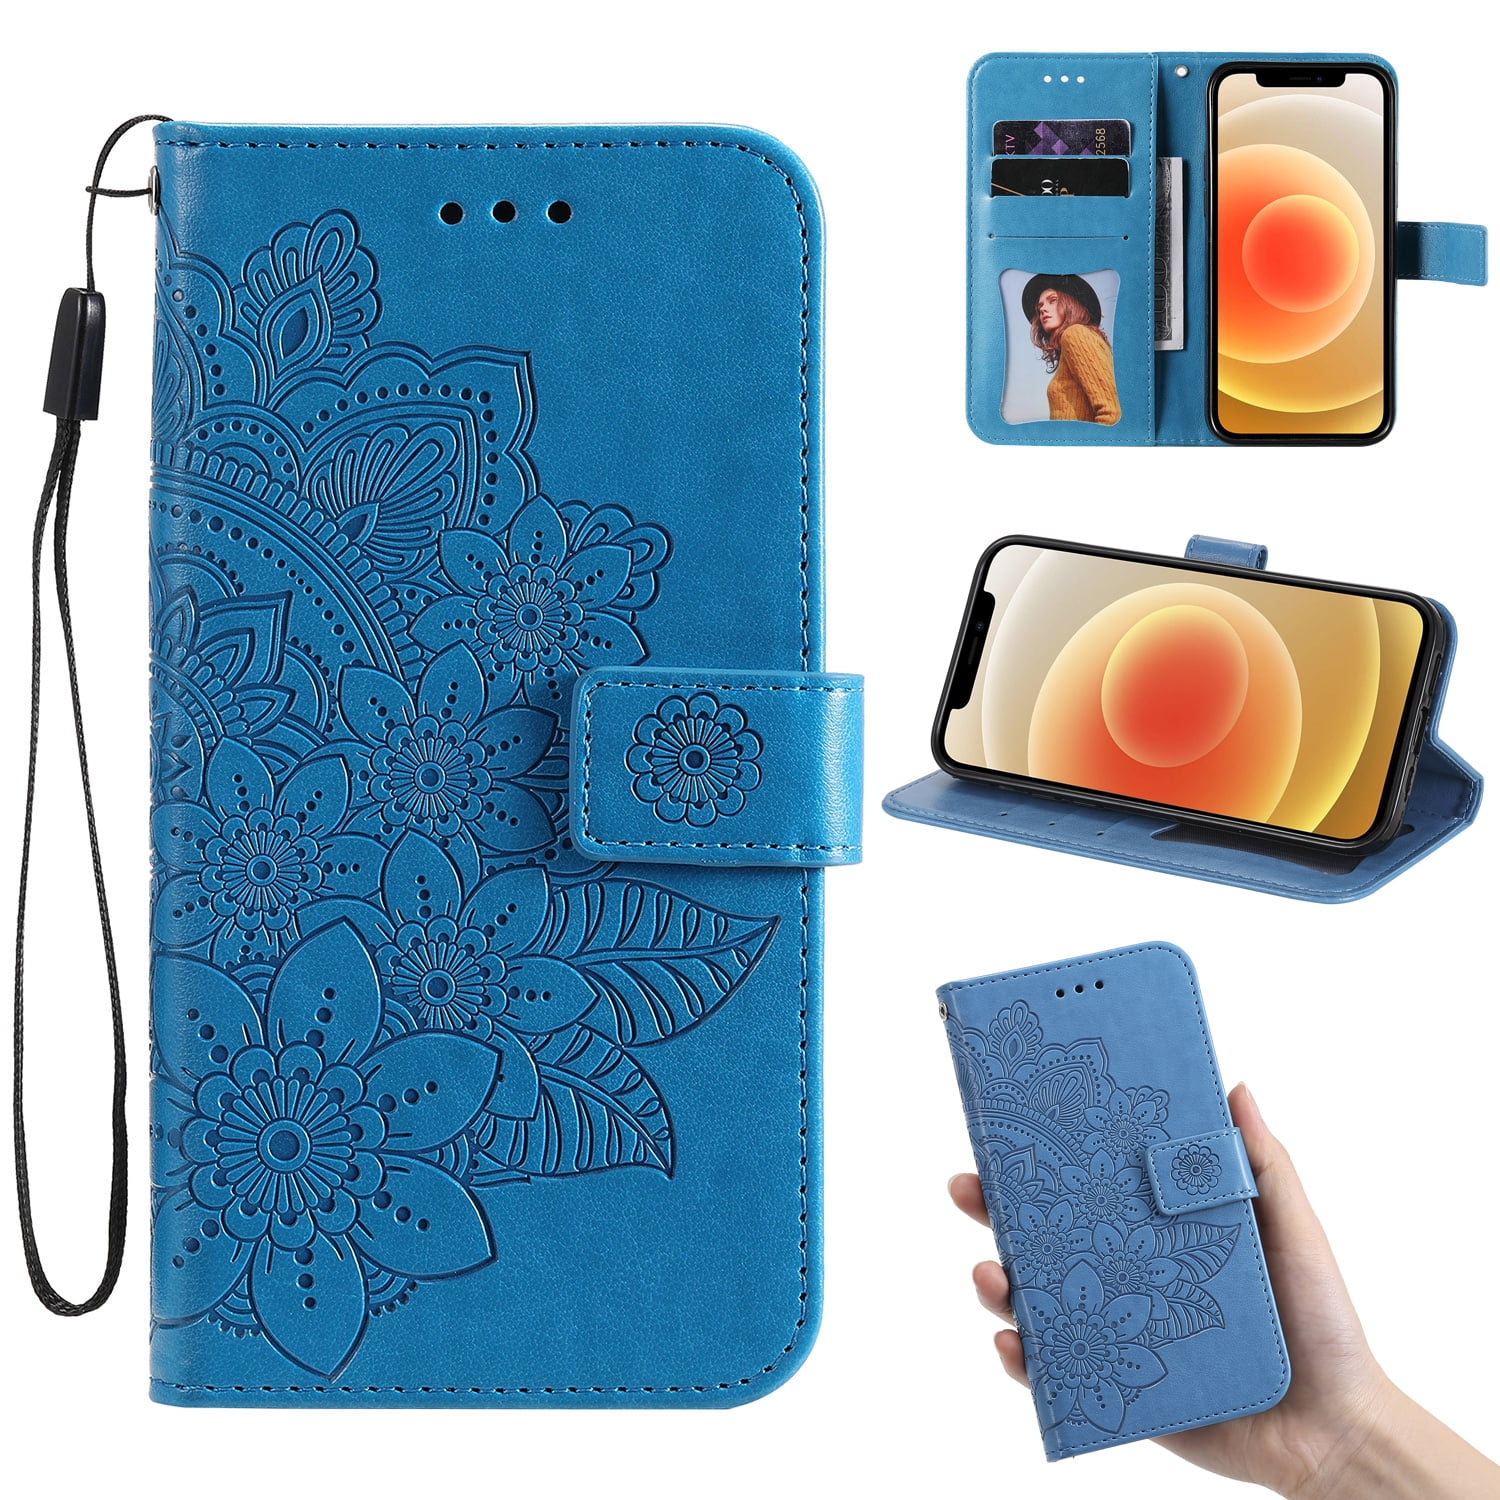 Galaxy S10e Case SONWO Bling Glitter Design Flip PU Leather Wallet Case Love Embossed Pattern Case with Kickstand and Card Slots for Samsung Galaxy S10e Blue 